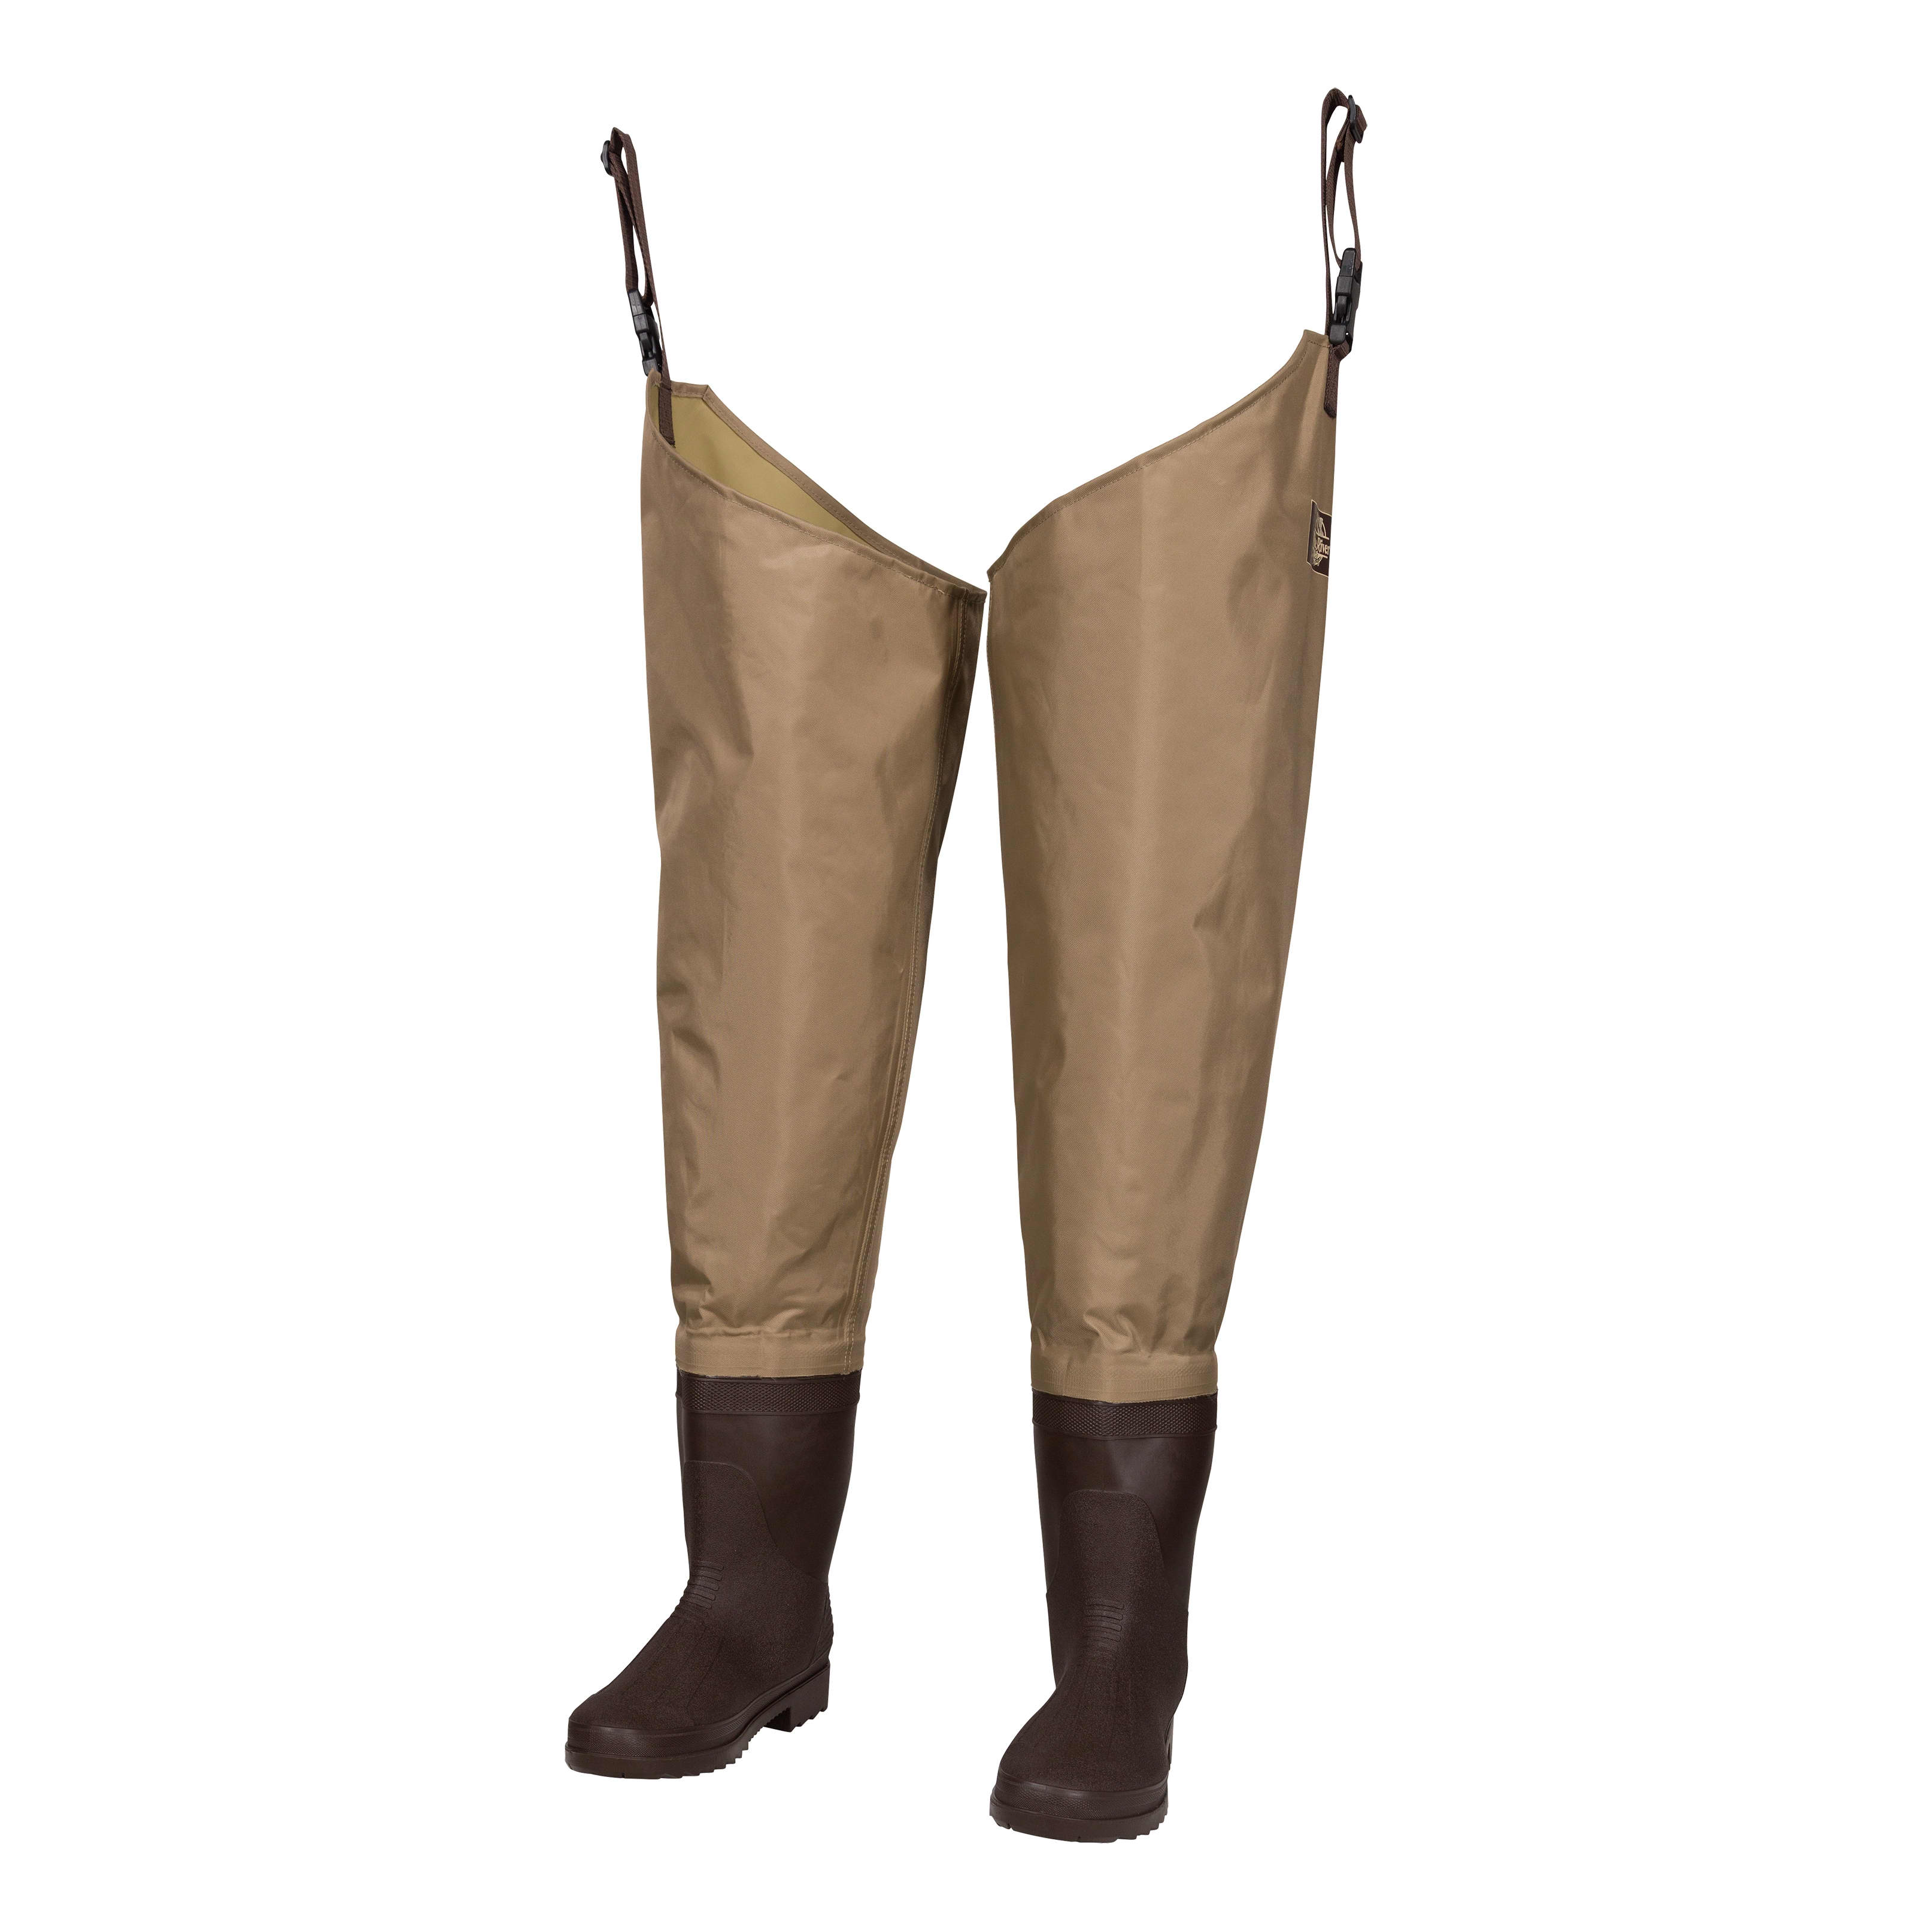 Cabela’s Chest Fly Fishing Khaki Waders With Brown Rubber Boots Men’s Size 8